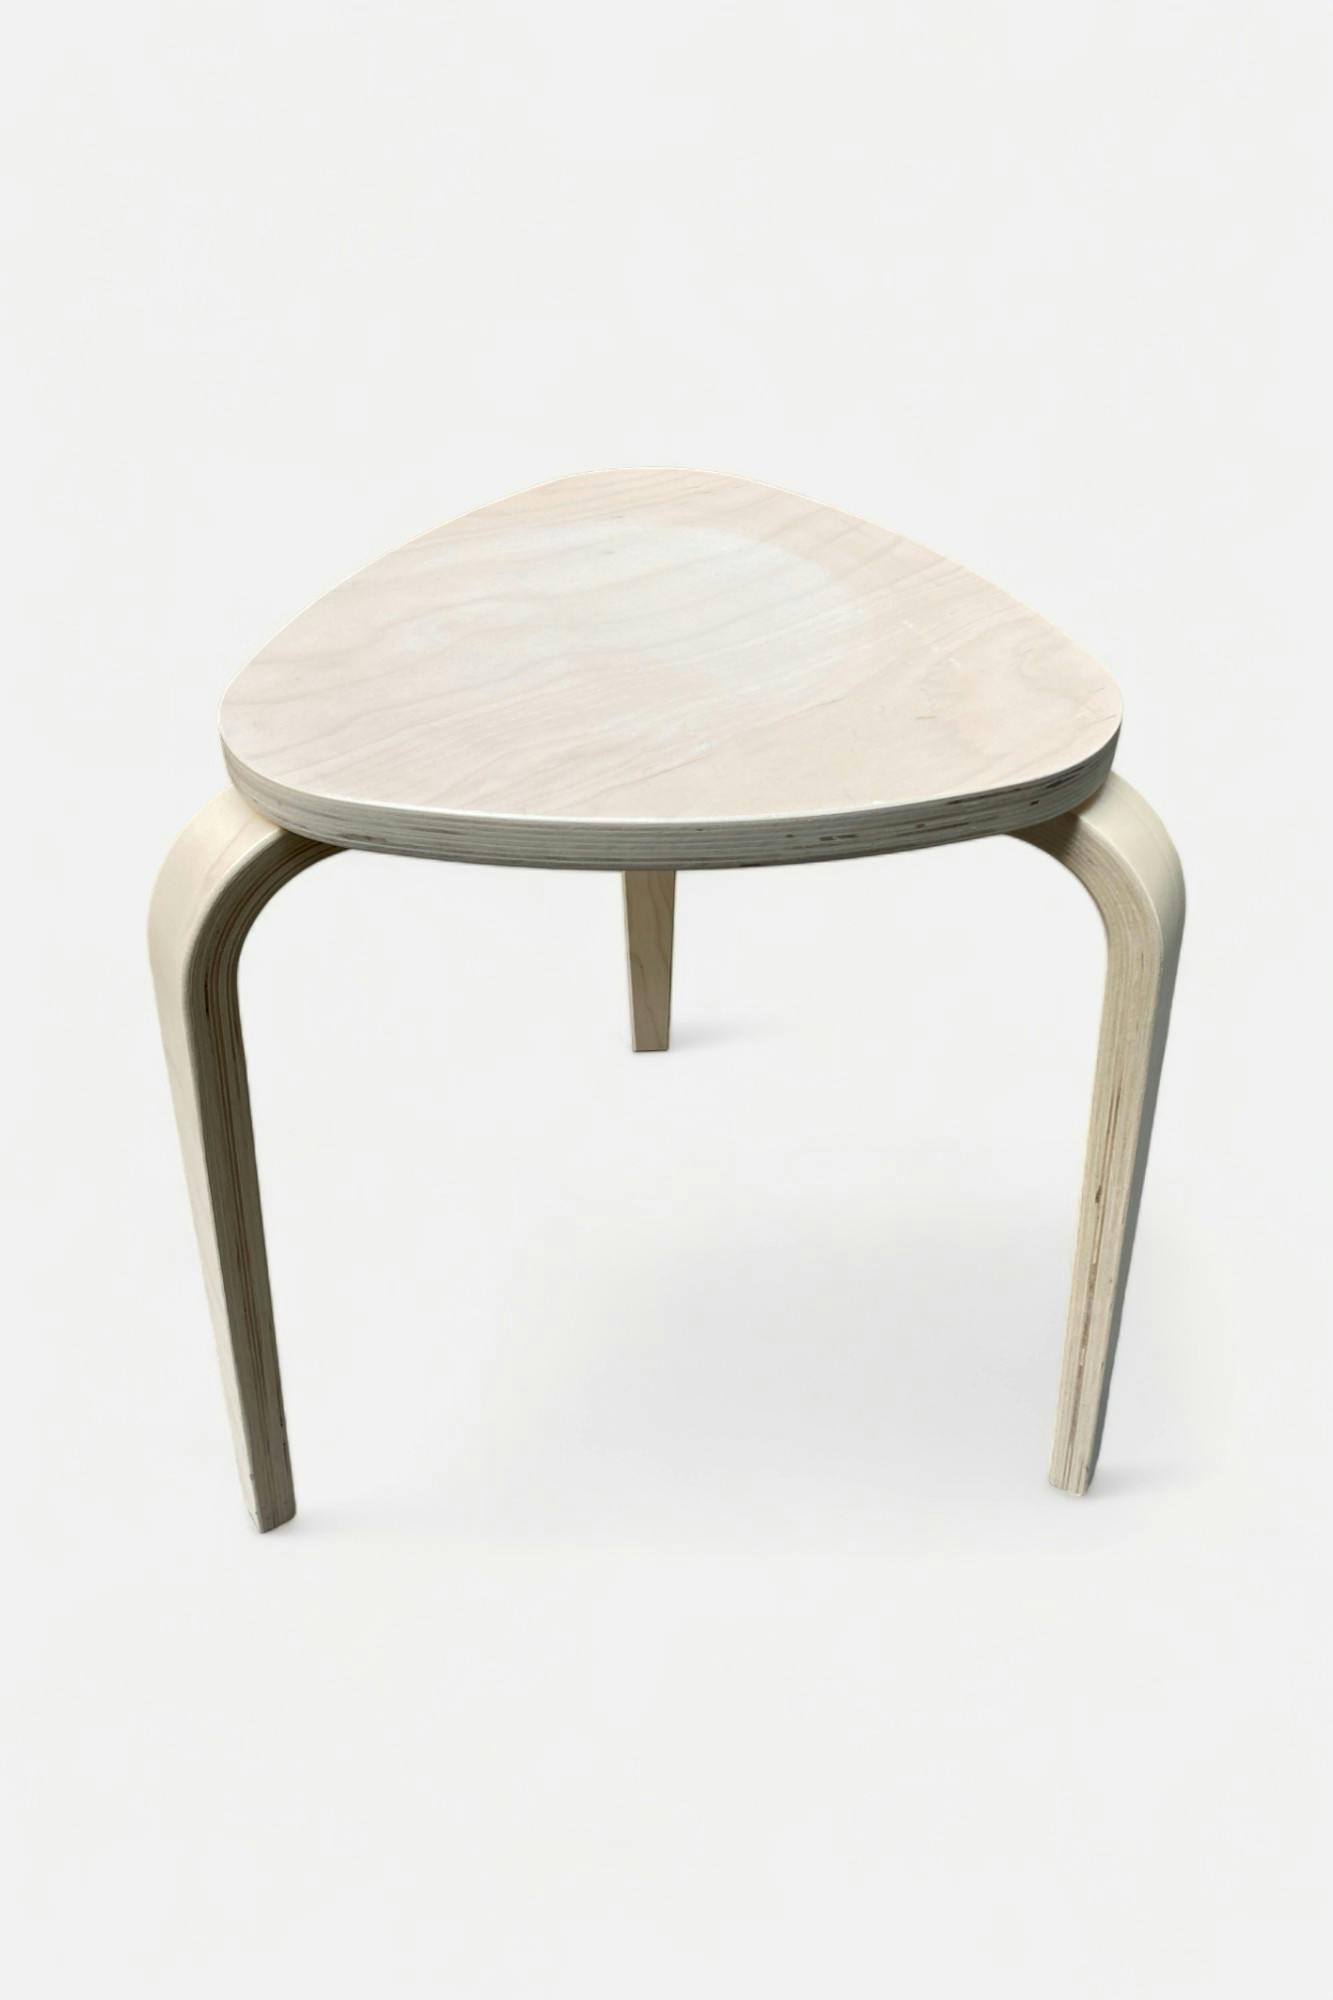 IKEA Kyrre wood stool - Second hand quality "Chairs" - Relieve Furniture